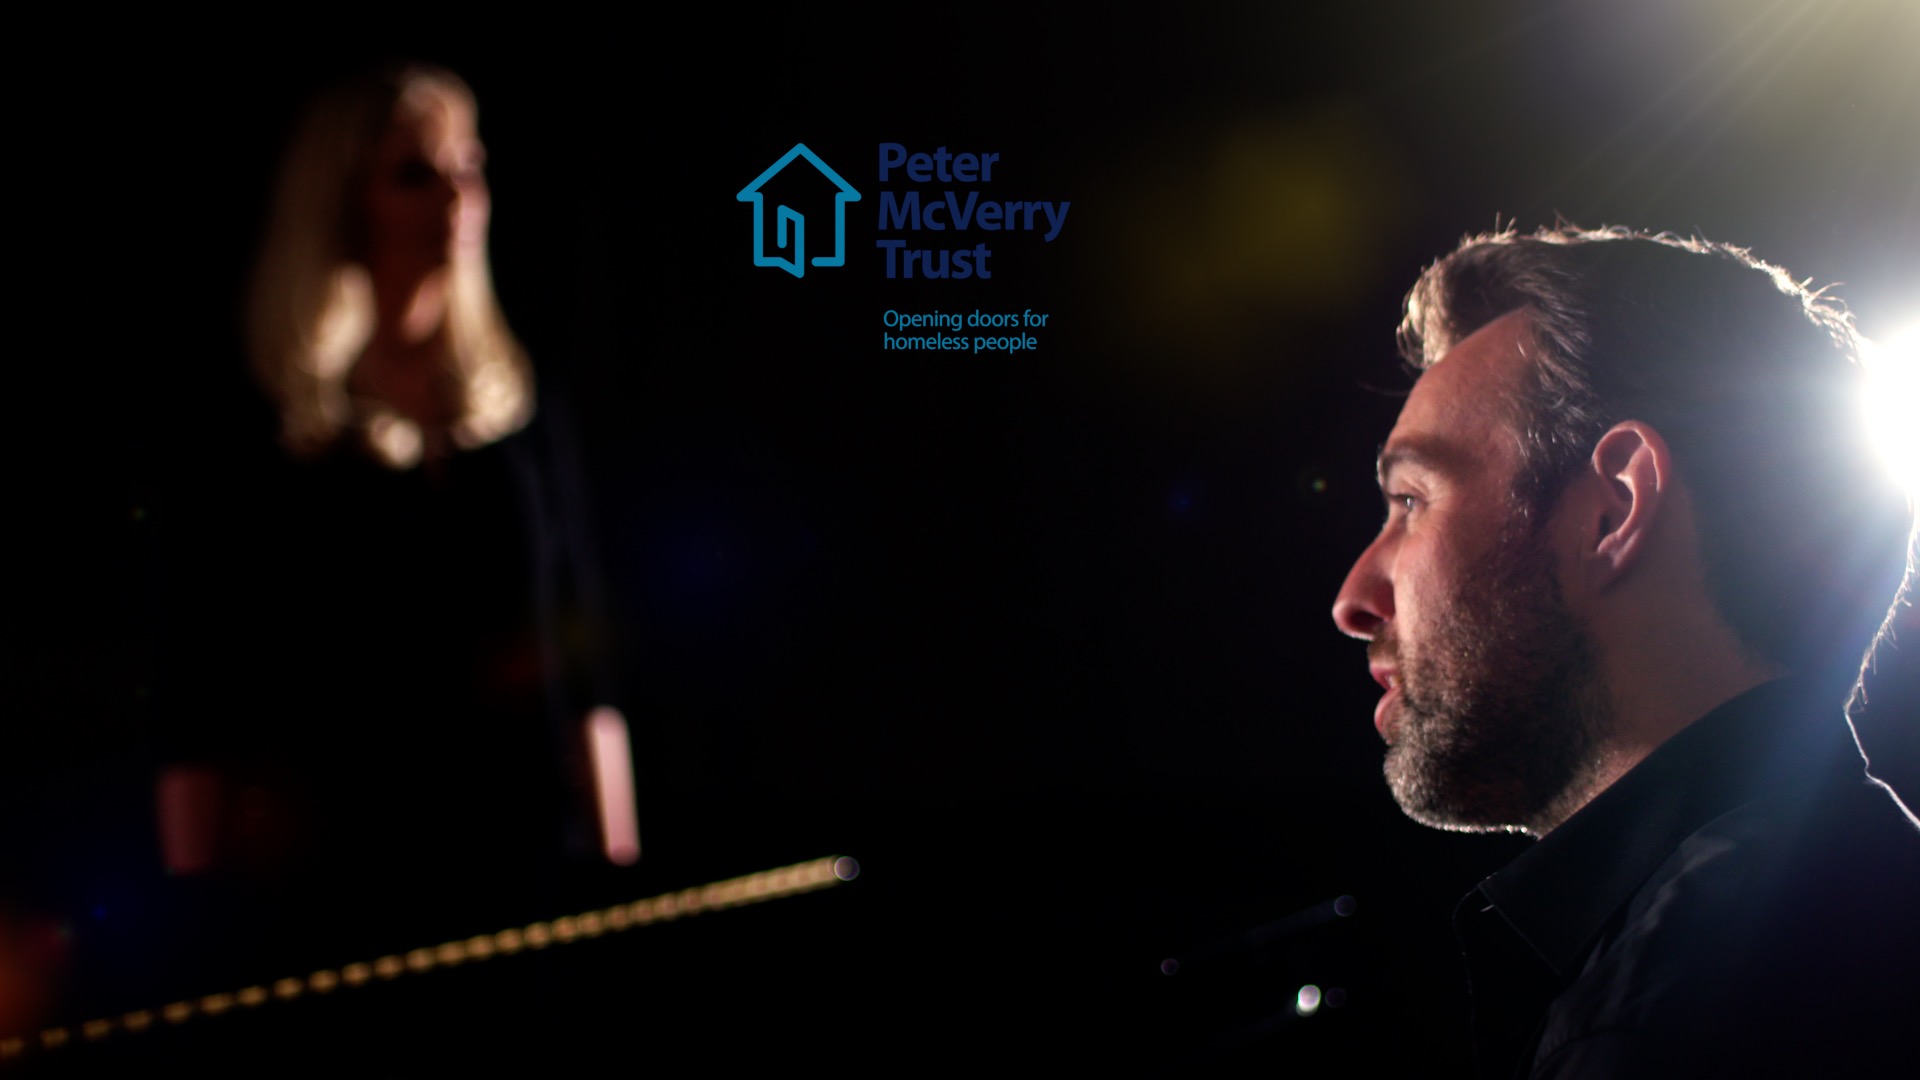 New Christmas song to raise money for Peter McVerry Trust this festive period